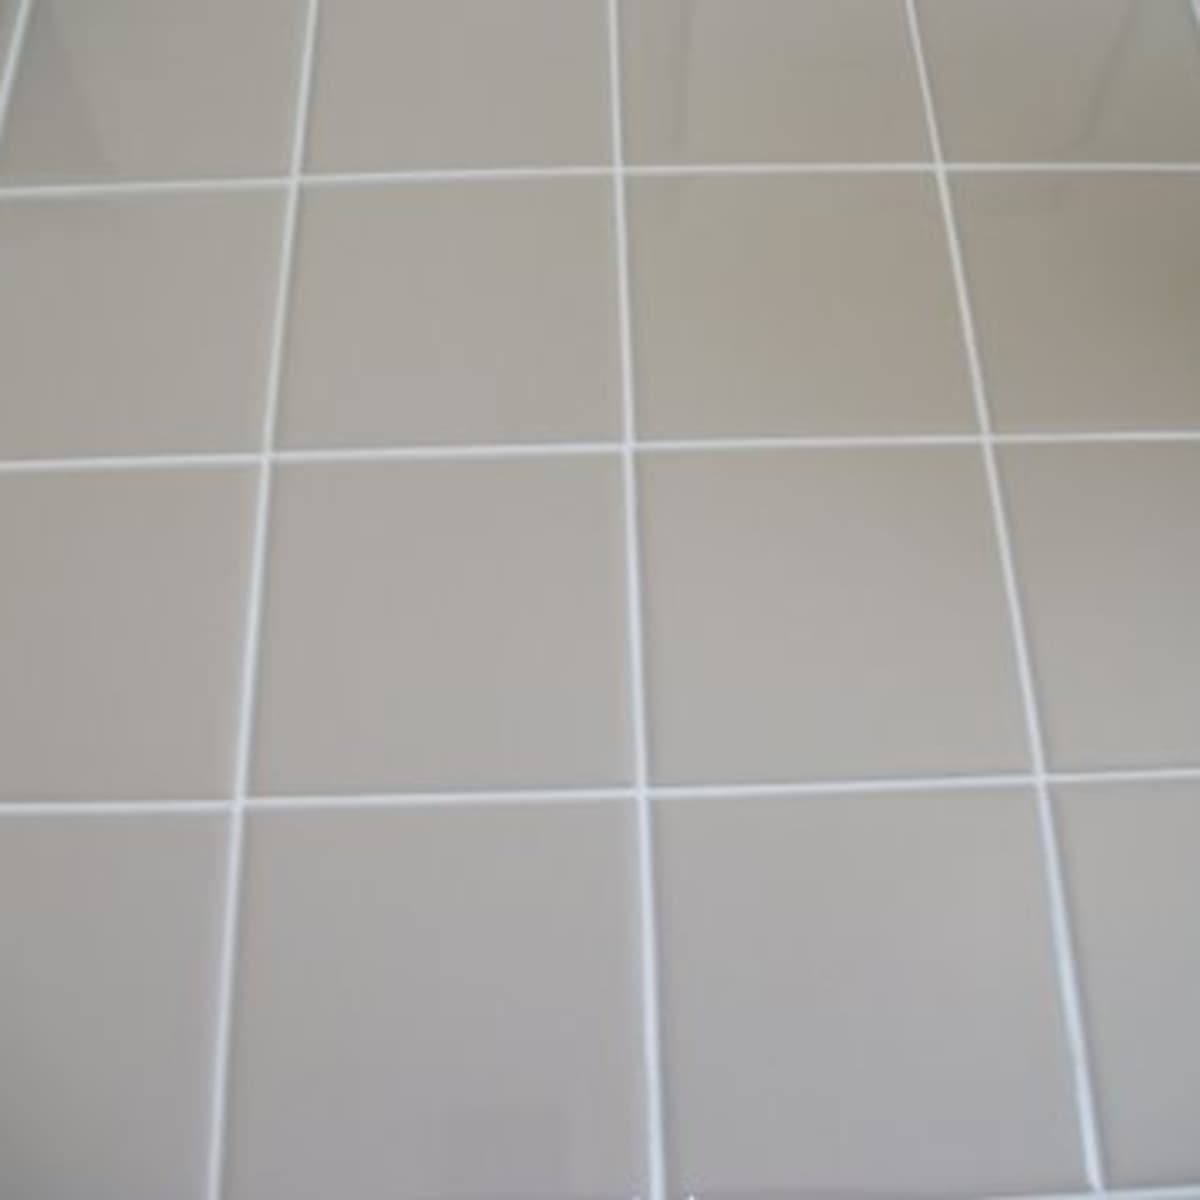 Tile Spacing Grout Cleaning, What Size Floor Tile Spacers Should I Use